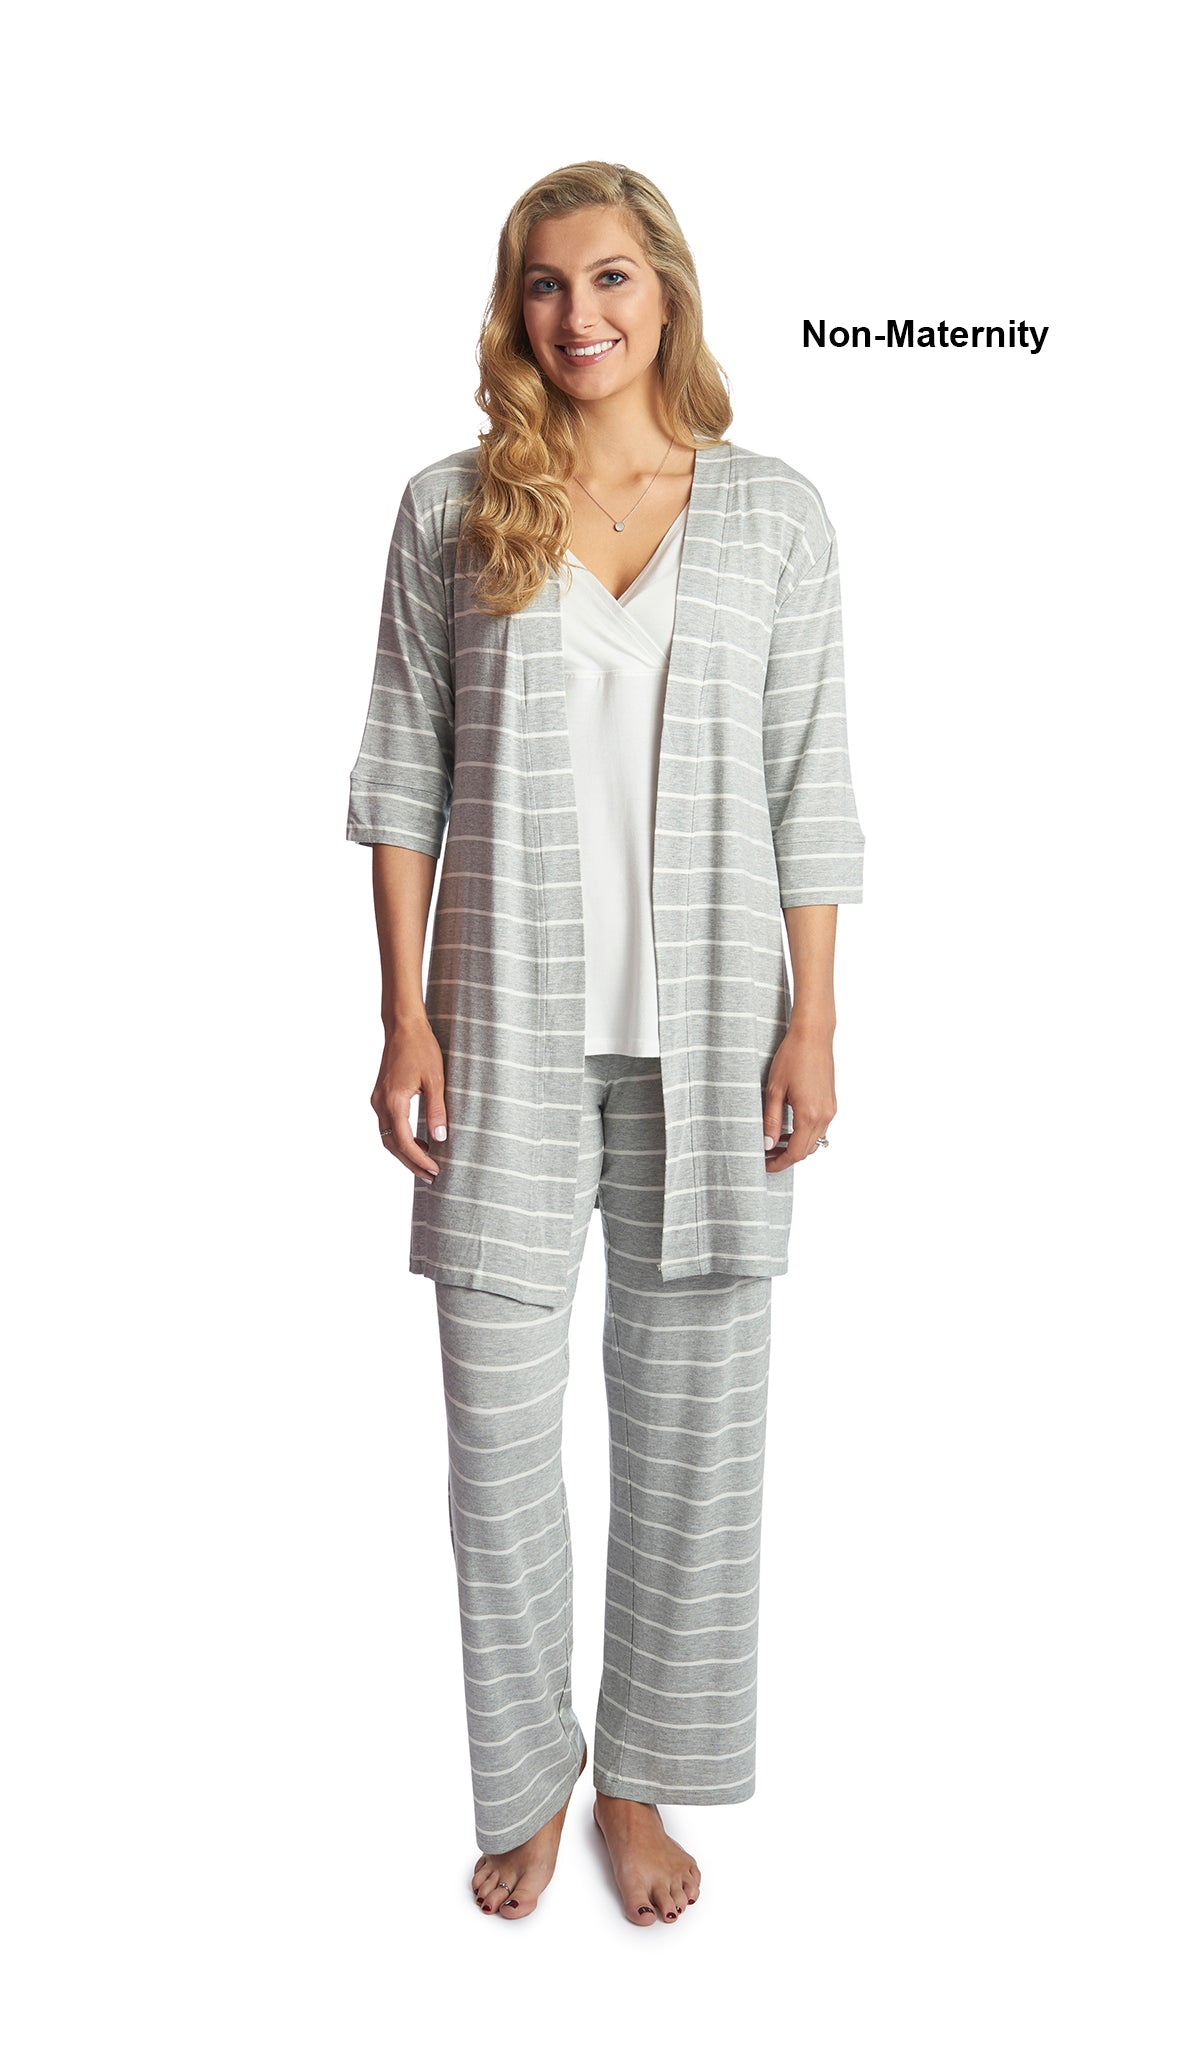 Heather Grey Analise 3-Piece Set. Woman wearing 3/4 sleeve robe, tank top and pant as non-maternity.